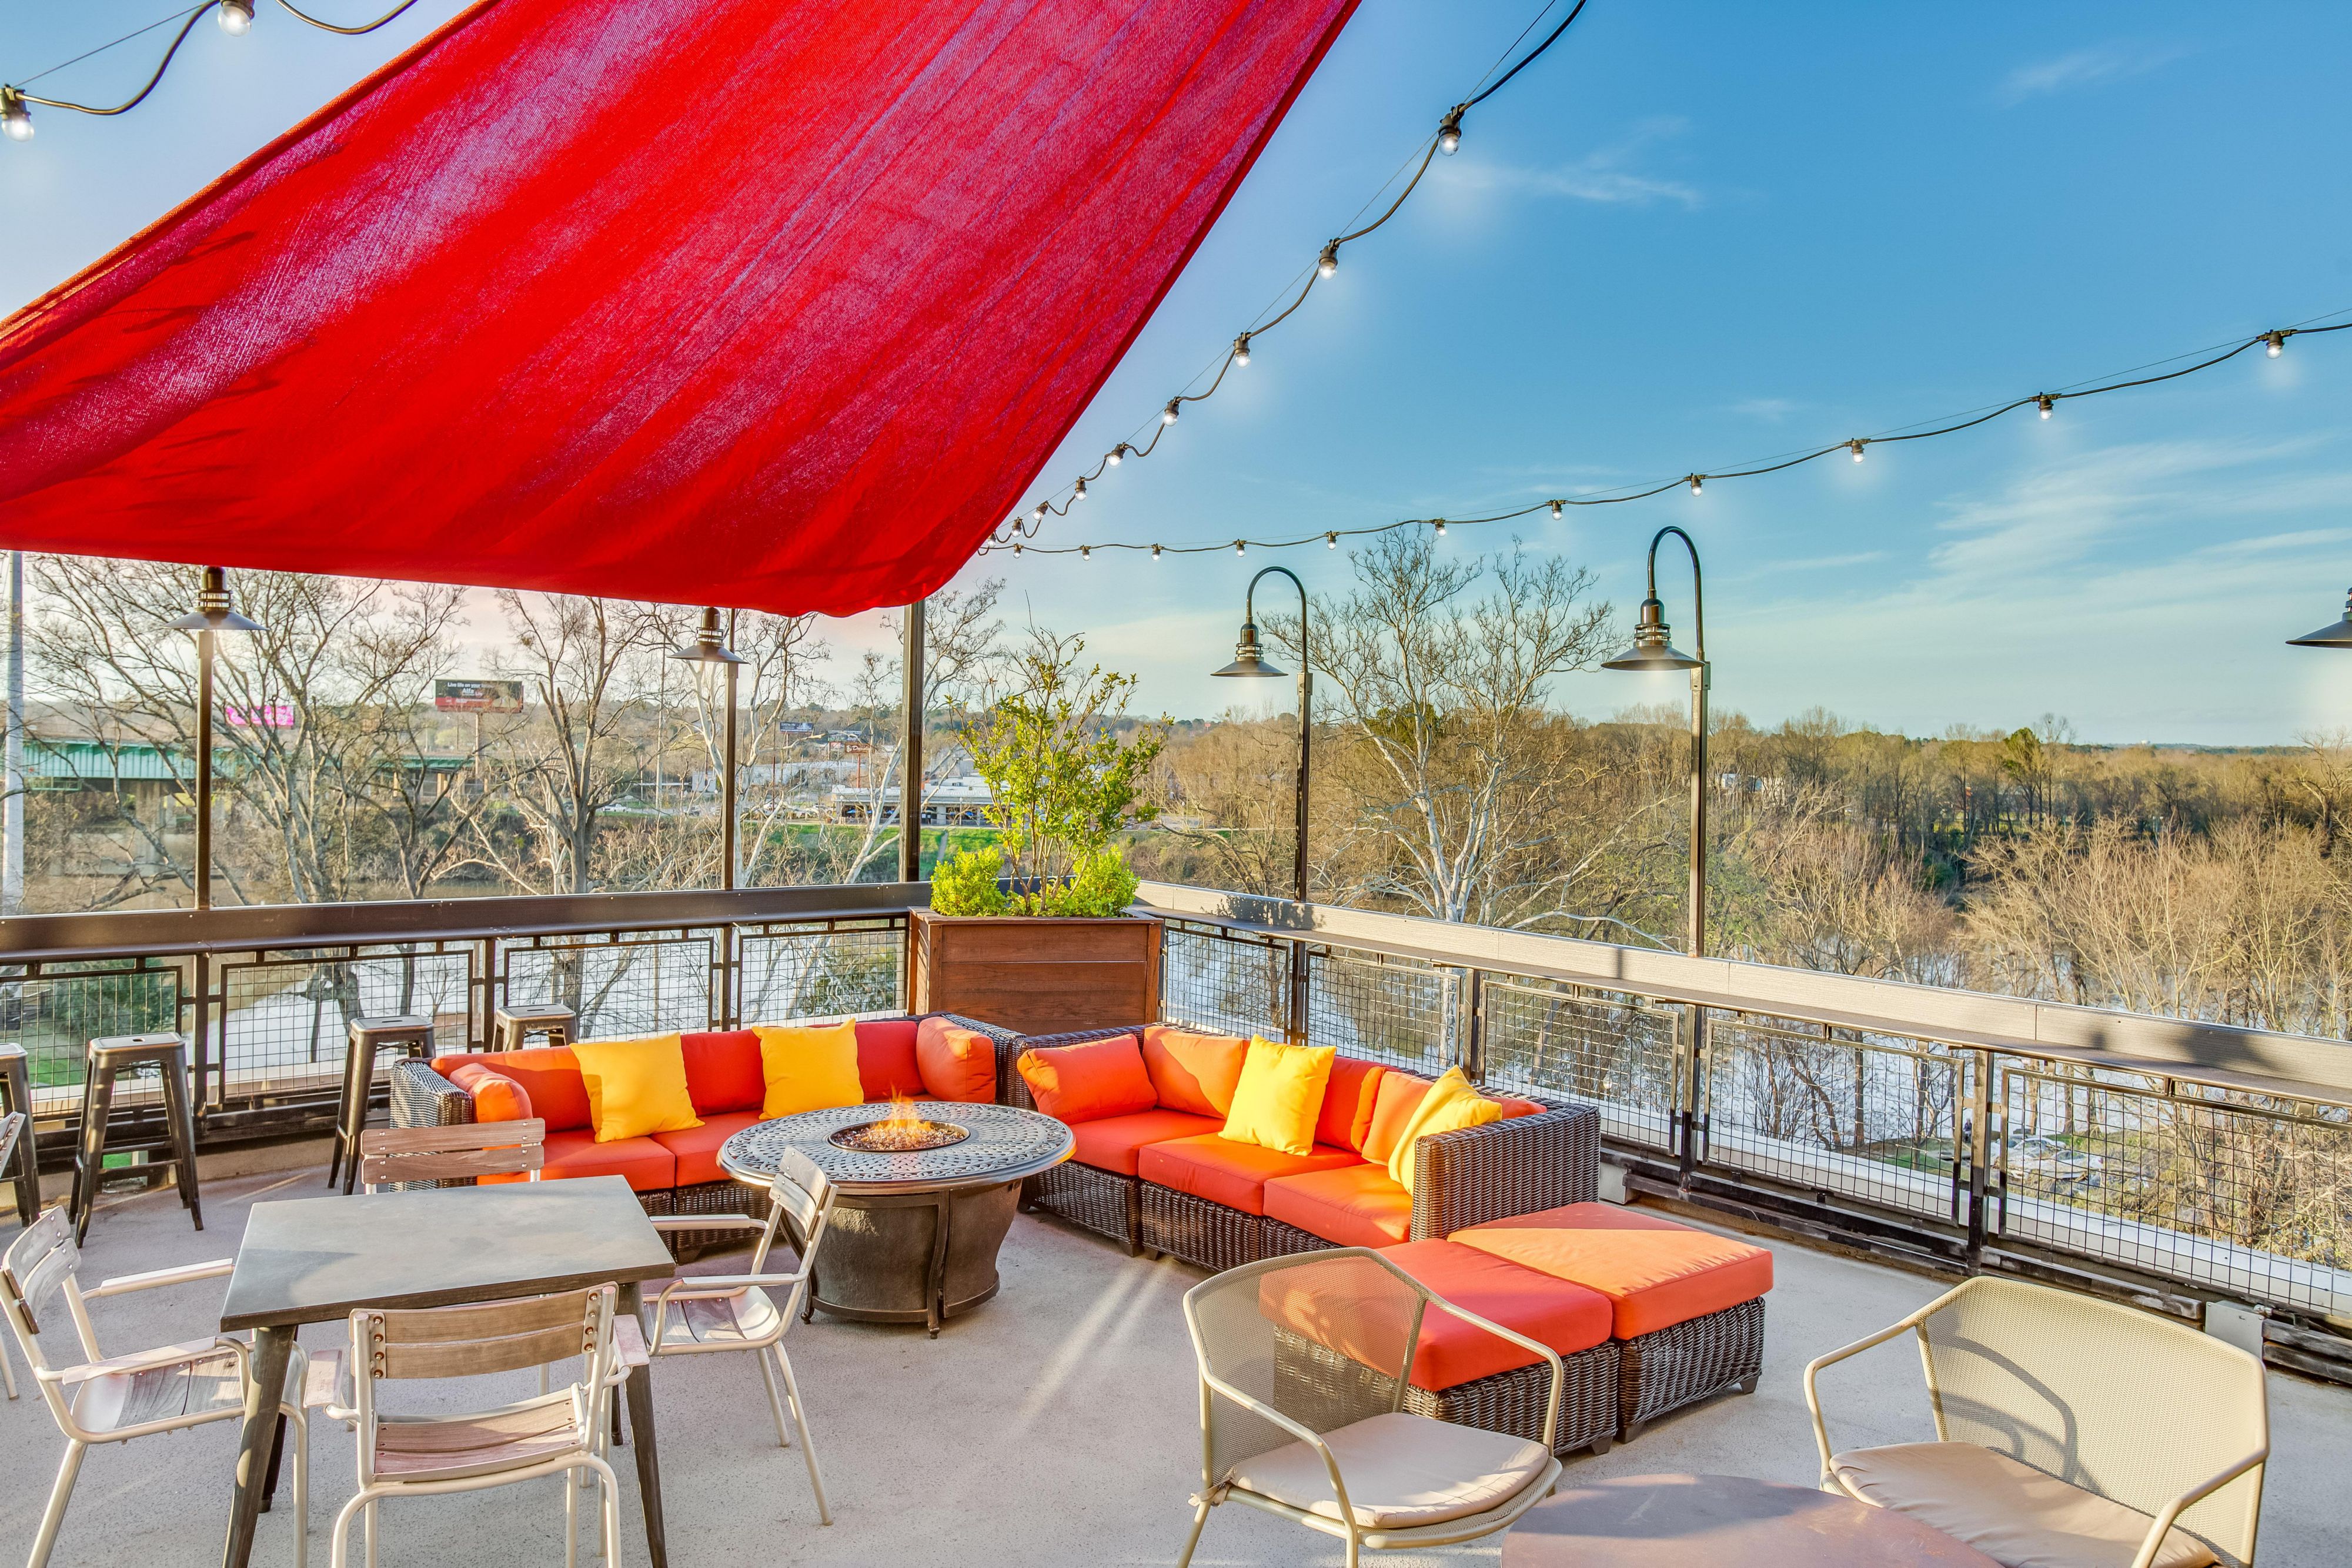 Hotel Indigo is the best place to stay when your favorite musical act is in Tuscaloosa! Our modern hotel is conveniently located next to the Tuscaloosa Amphitheater and even provides an ideal secondary viewing location at The Lookout, the hotel's rooftop bar.